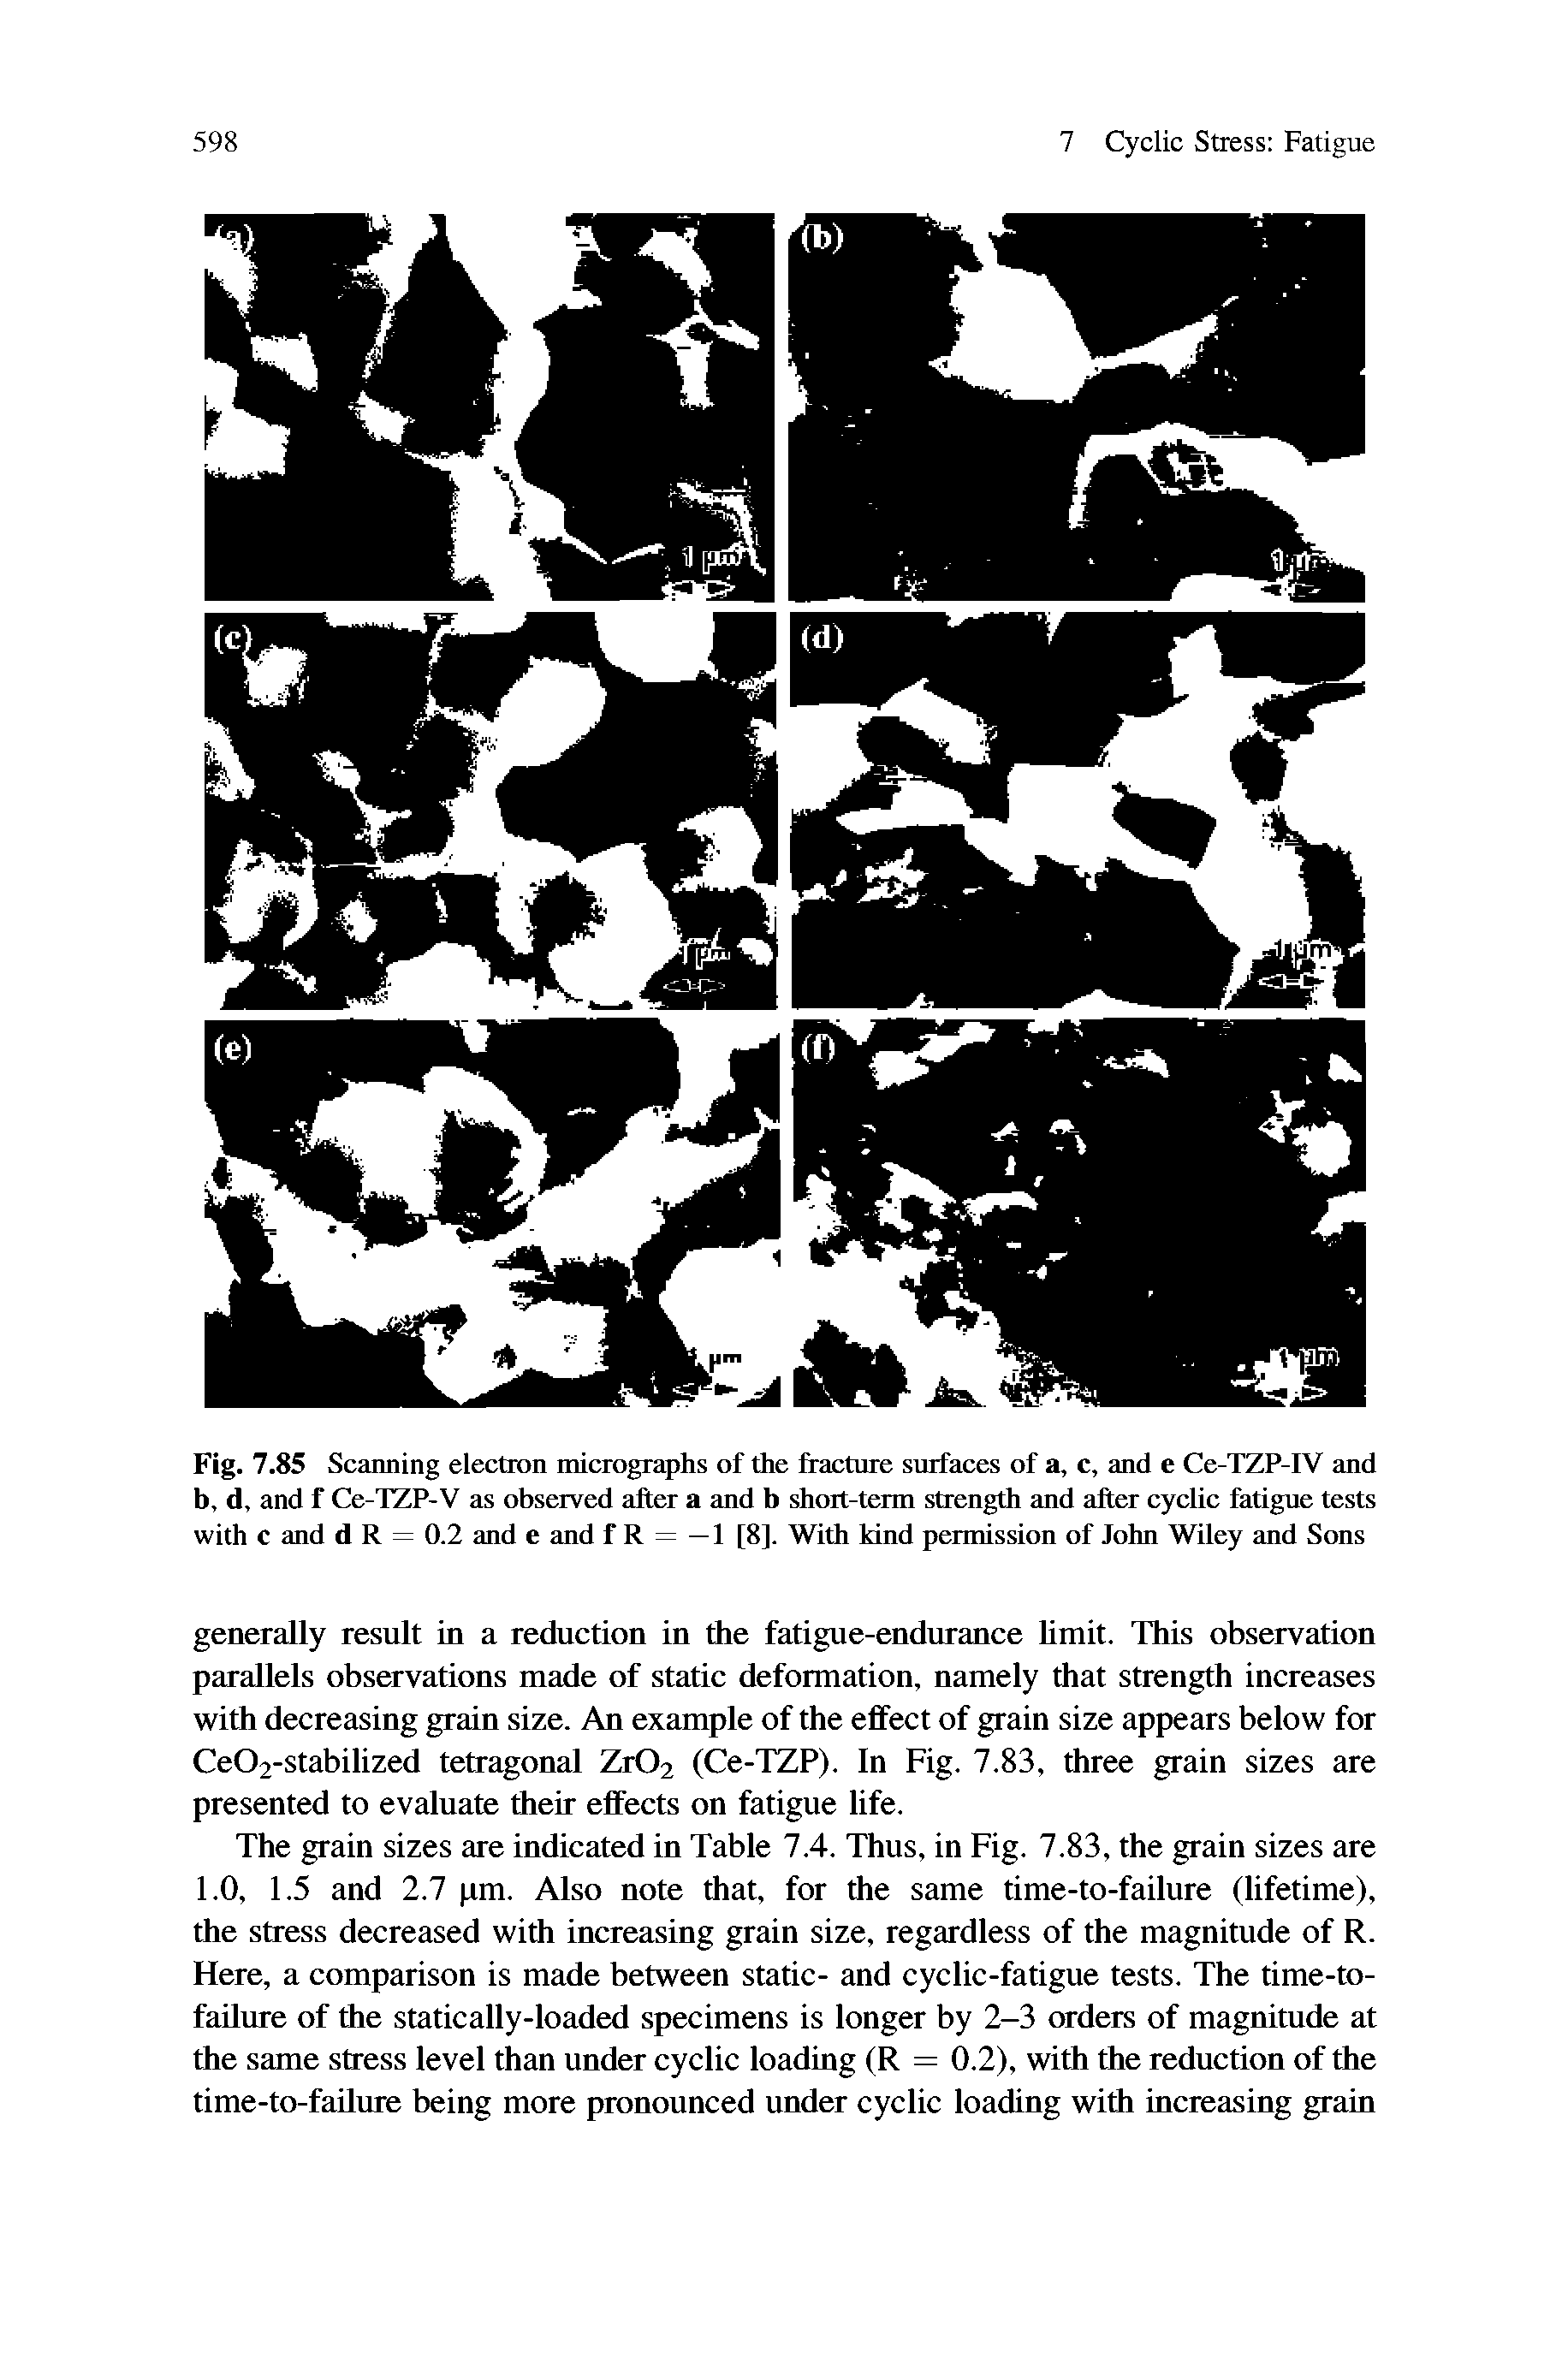 Fig. 7.85 Scanning electron micrographs of the fracture surfaces of a, c, and e Ce-TZP-IV and b, d, and f Ce-TZP-V as observed after a and b short-term strength and after cyclic fatigue tests with C and d R = 0.2 and e and f R = — 1 [8]. With kind permission of John Wiley and Sons...